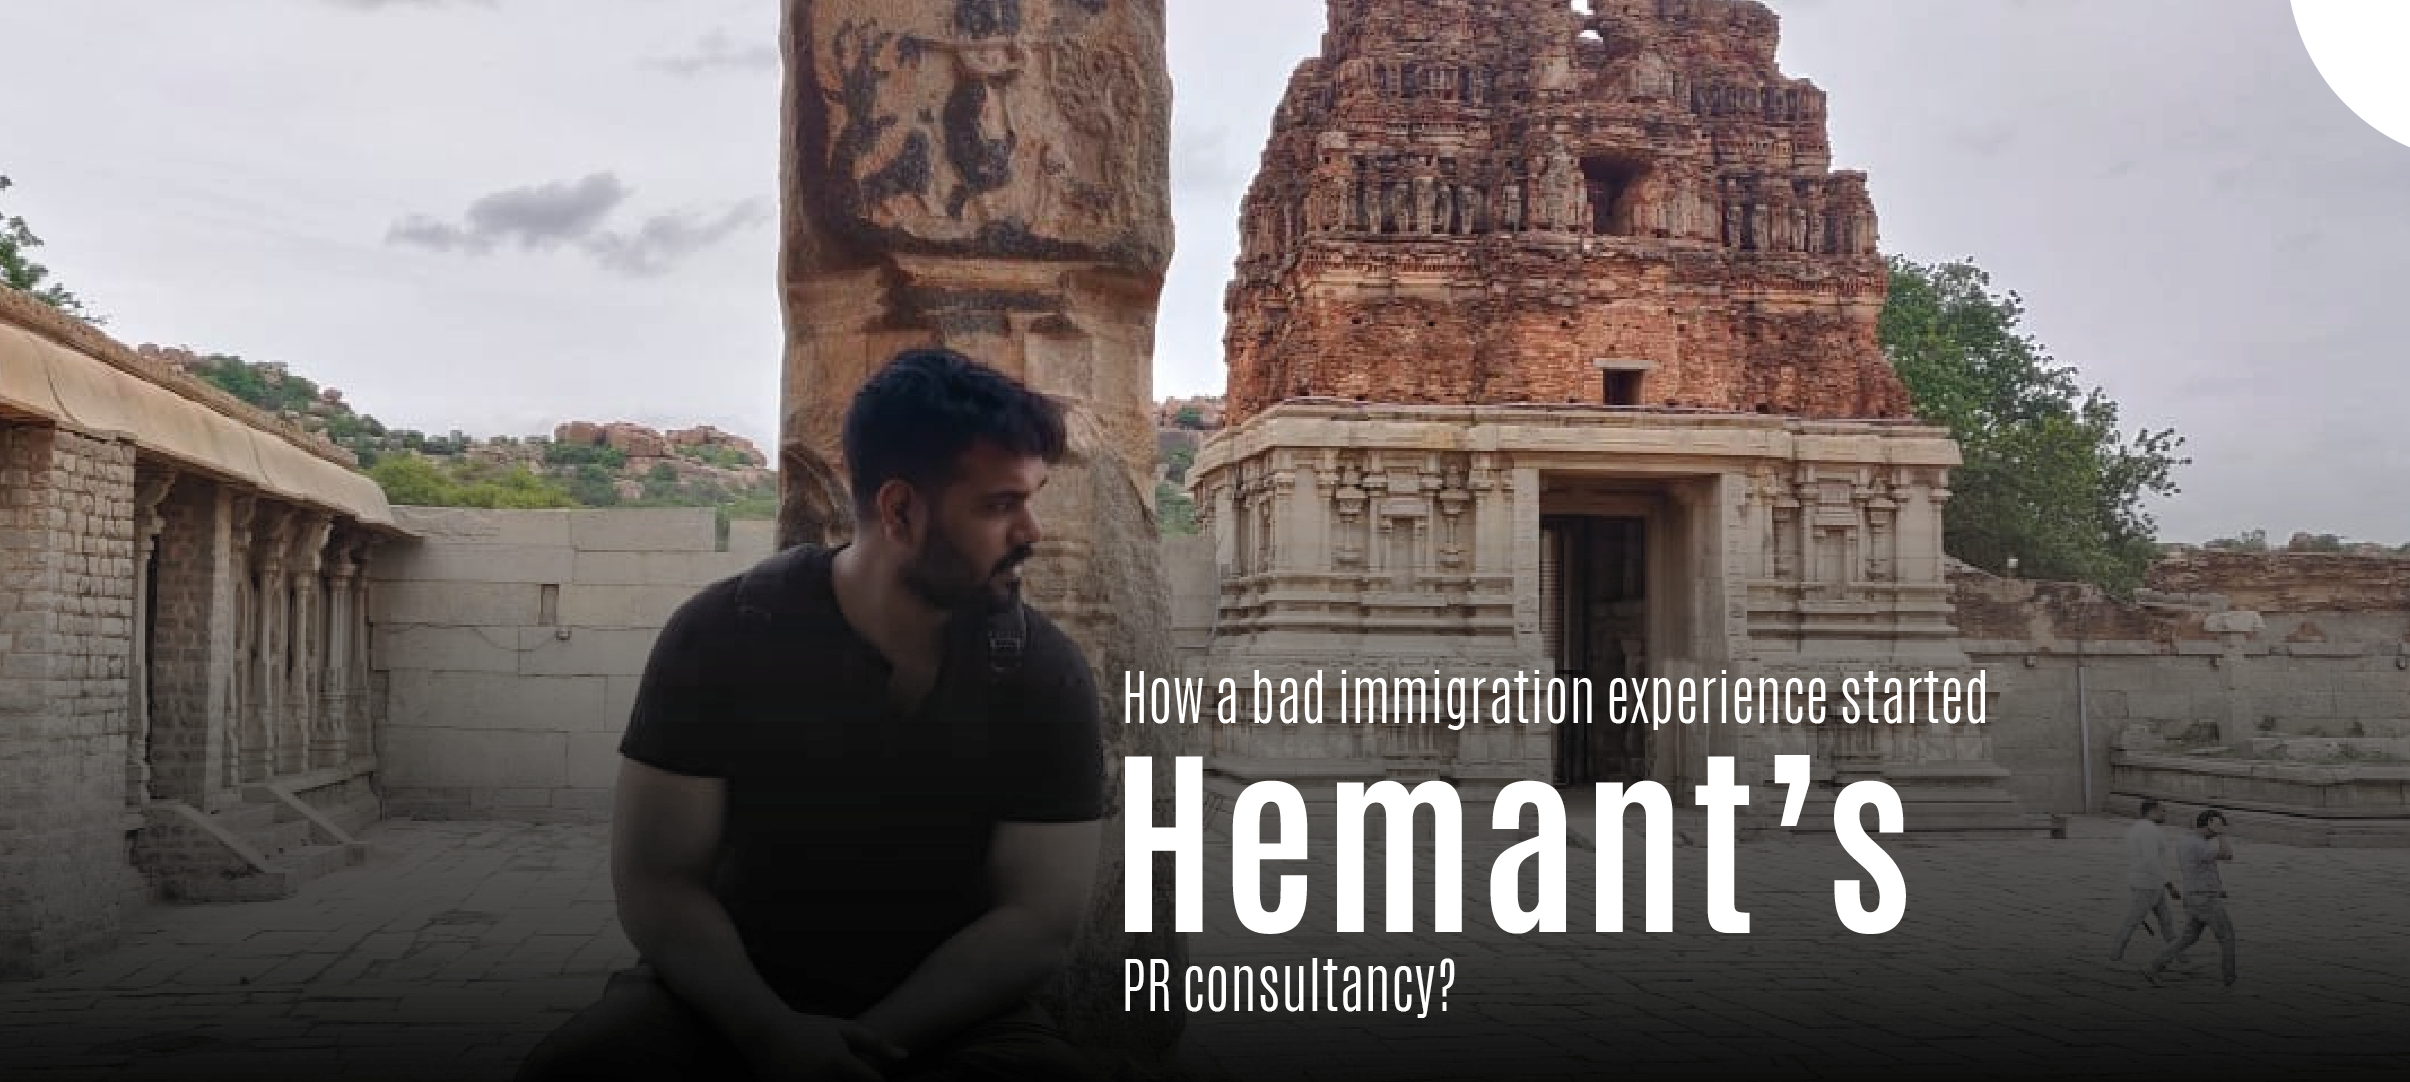 Hemant Yadav started taking live sessions after educating himself about Canada's immigration and study programs.